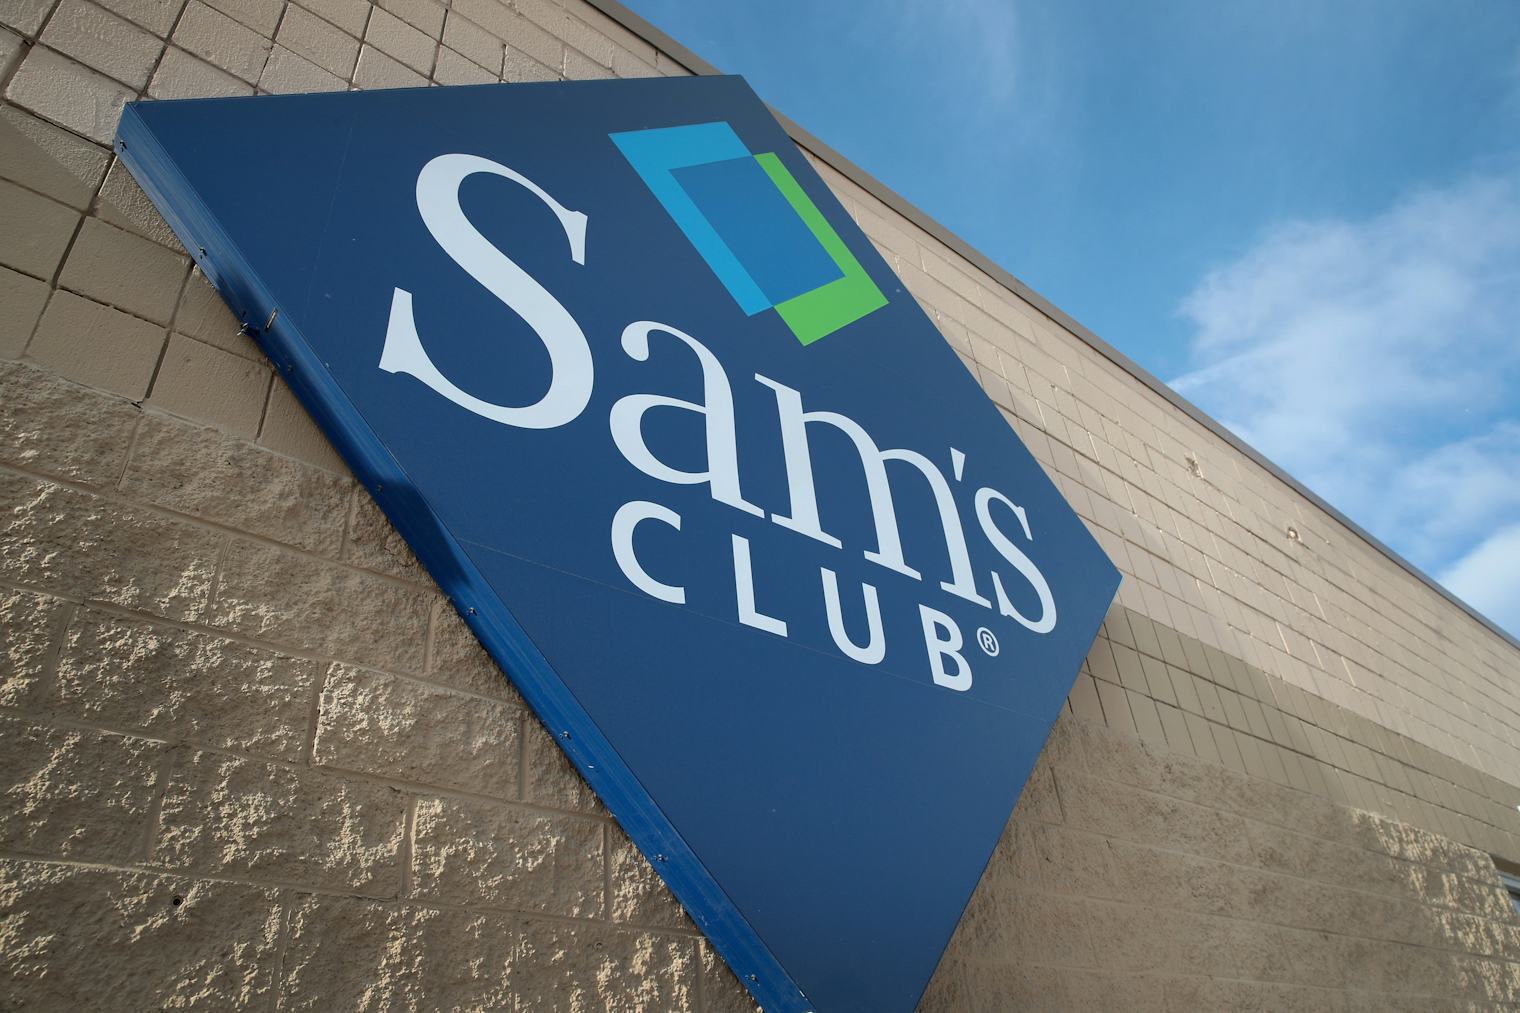 Sam's Club Christmas Eve & Day 2021 Hours Are Shorter Than usual